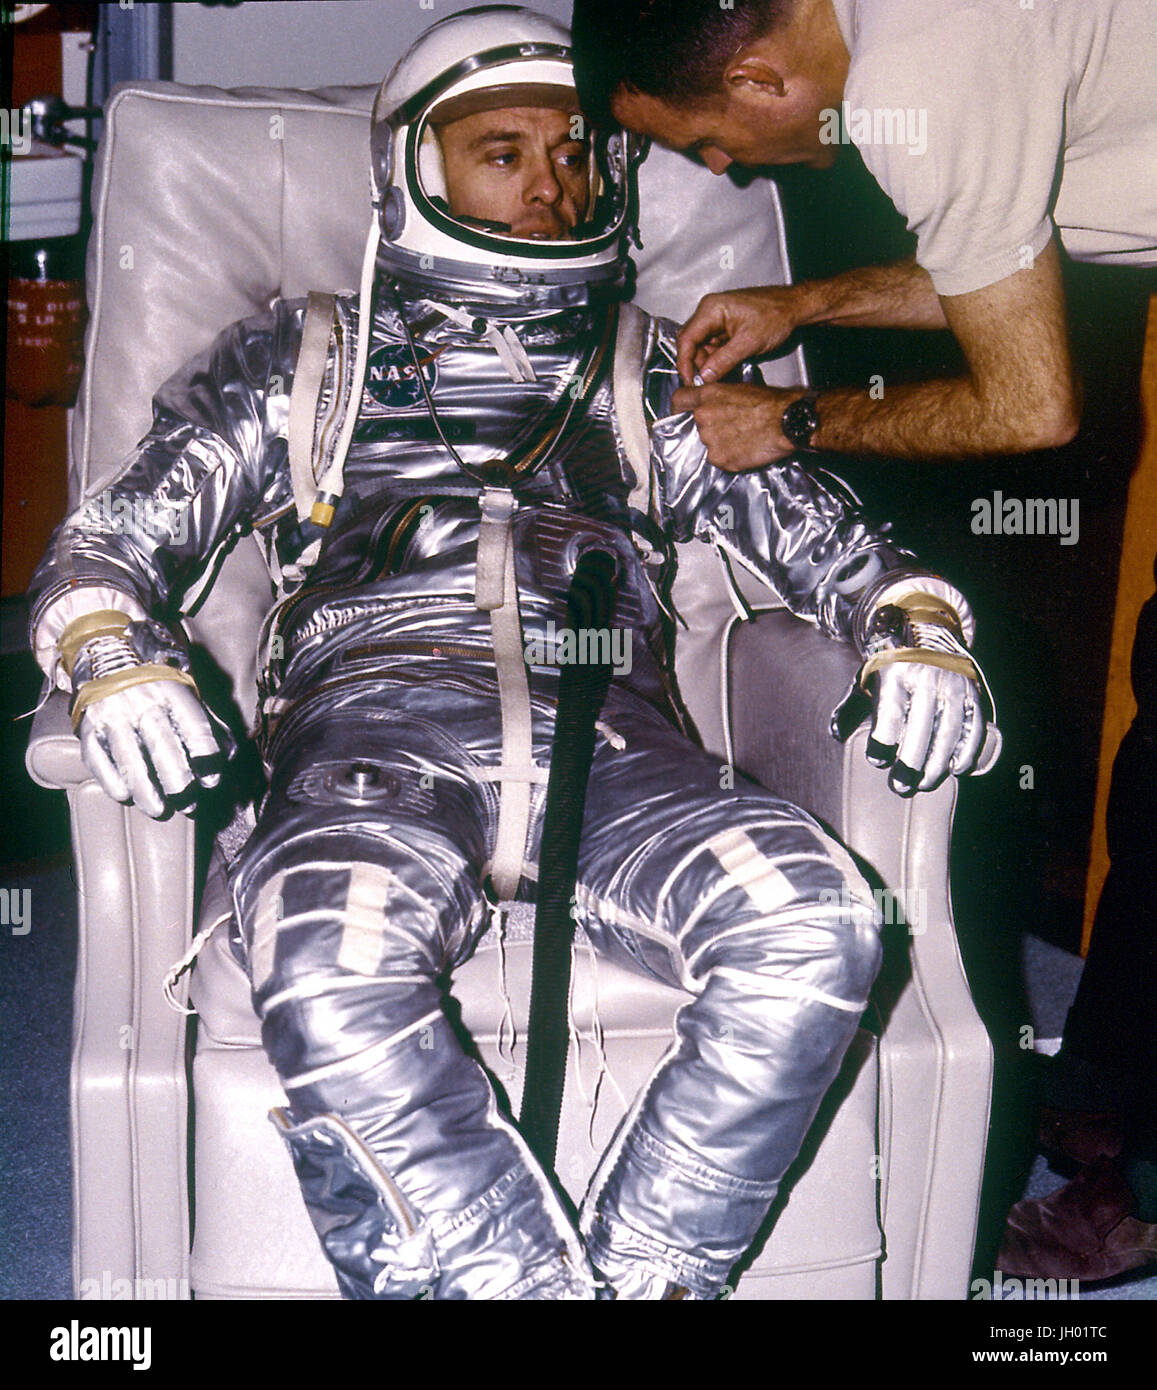 Astronaut Alan B. Shepard, Jr. during suiting for First Manned Suborbital Flight on MR-3 (Mercury-Redstone). Freedom 7, on May 5, 1961. Stock Photo